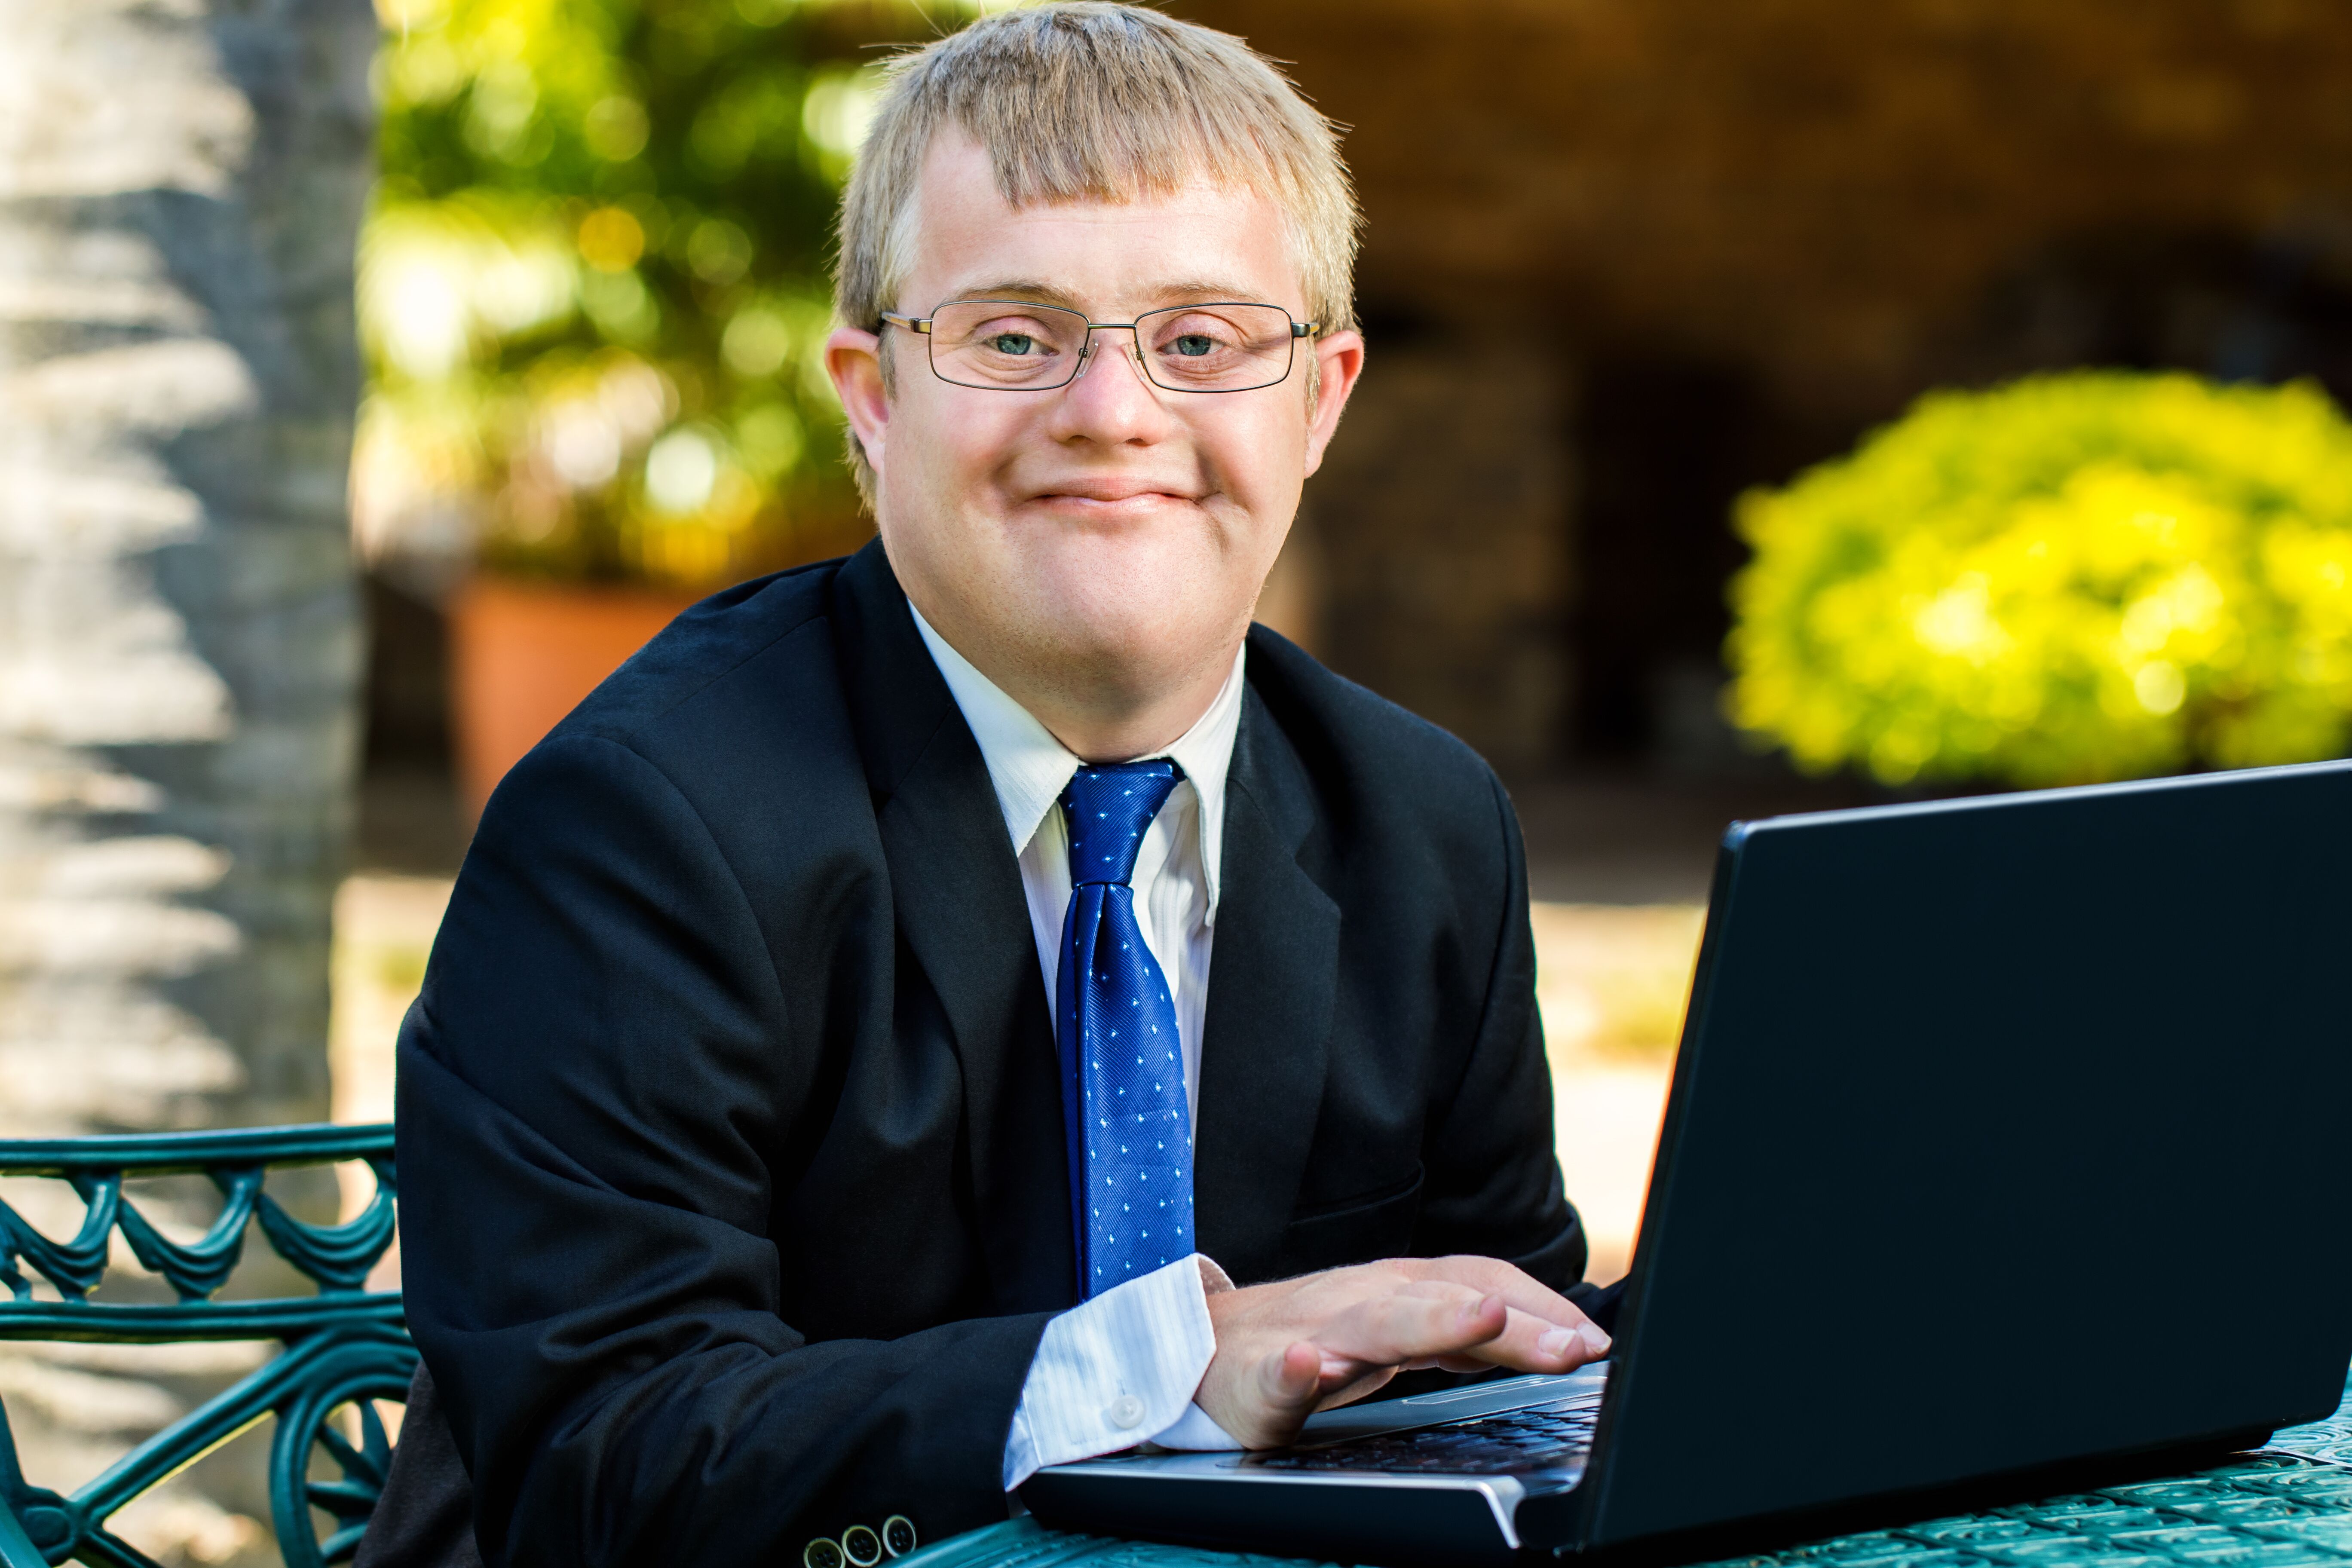 Boy with Down syndrome in suit jacket and tie, sitting behind a laptop and smiling